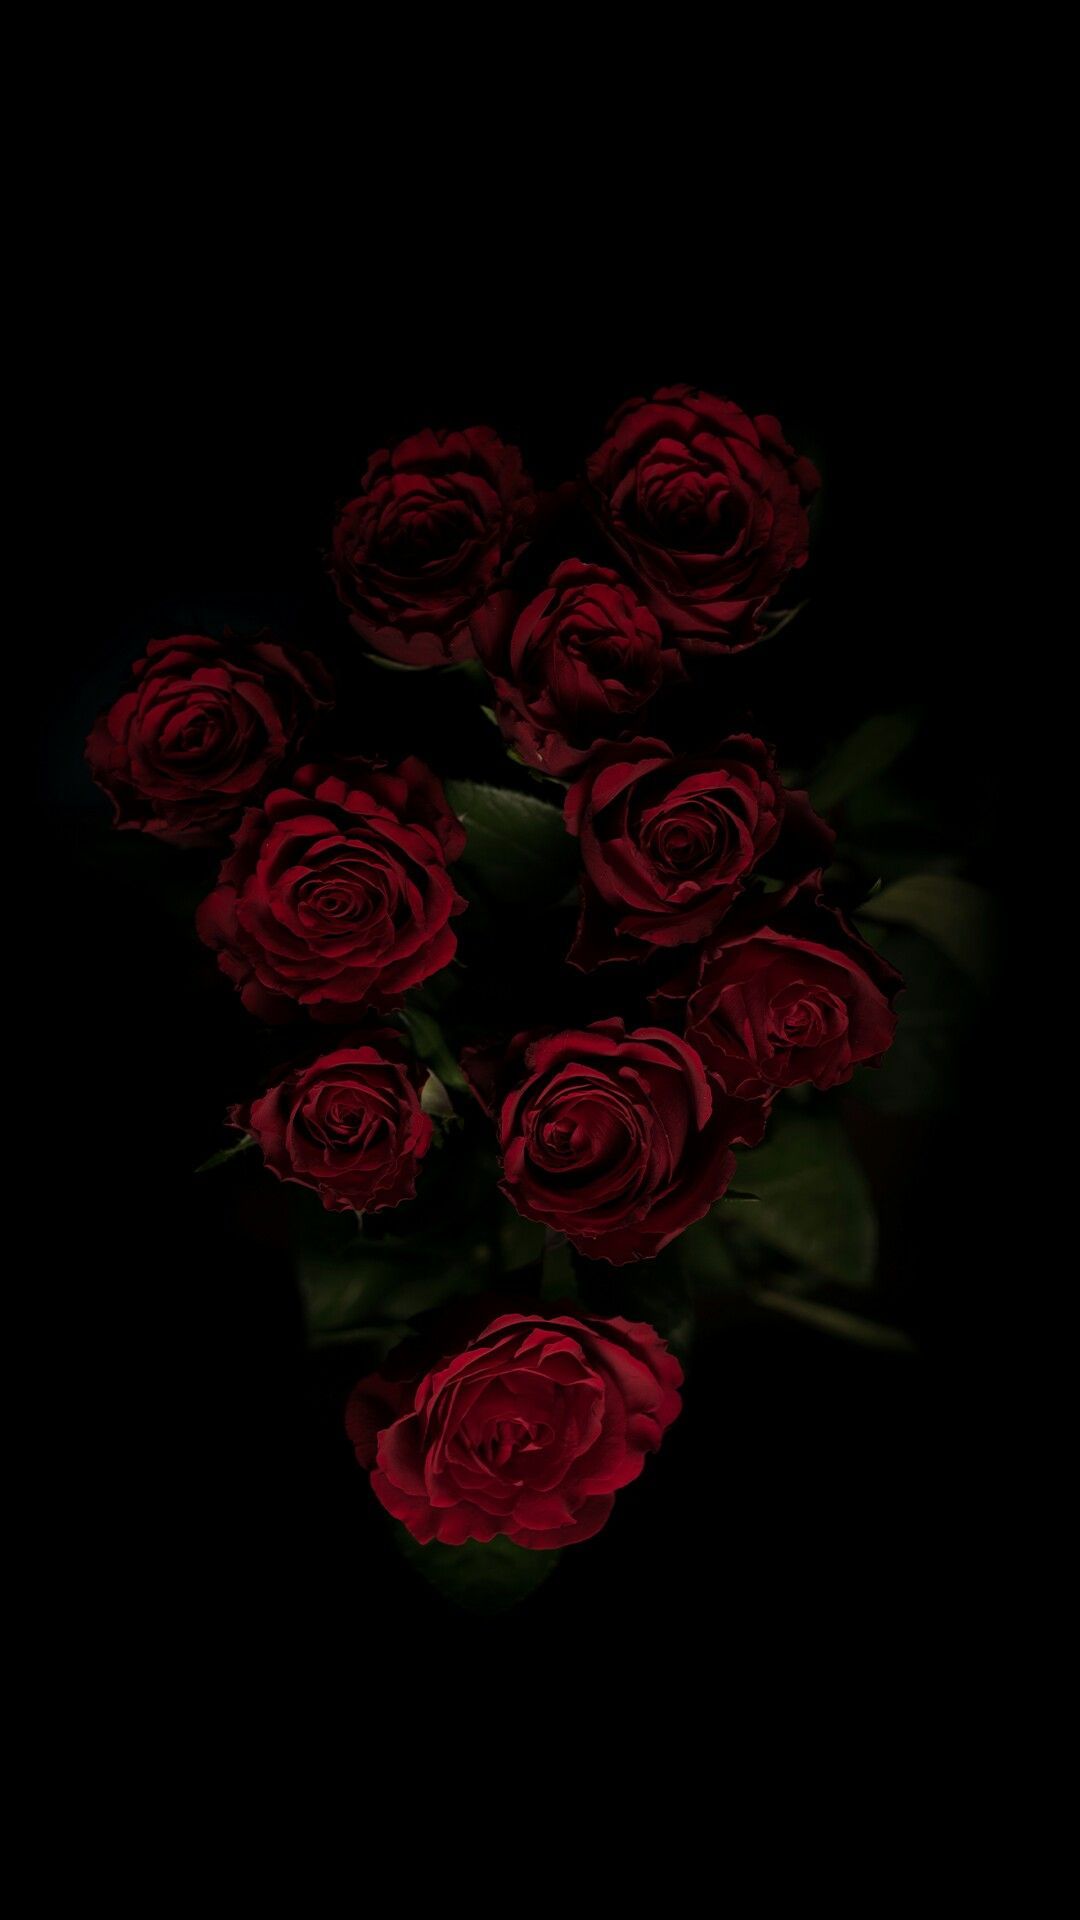 Black Rose Aesthetic Wallpapers on